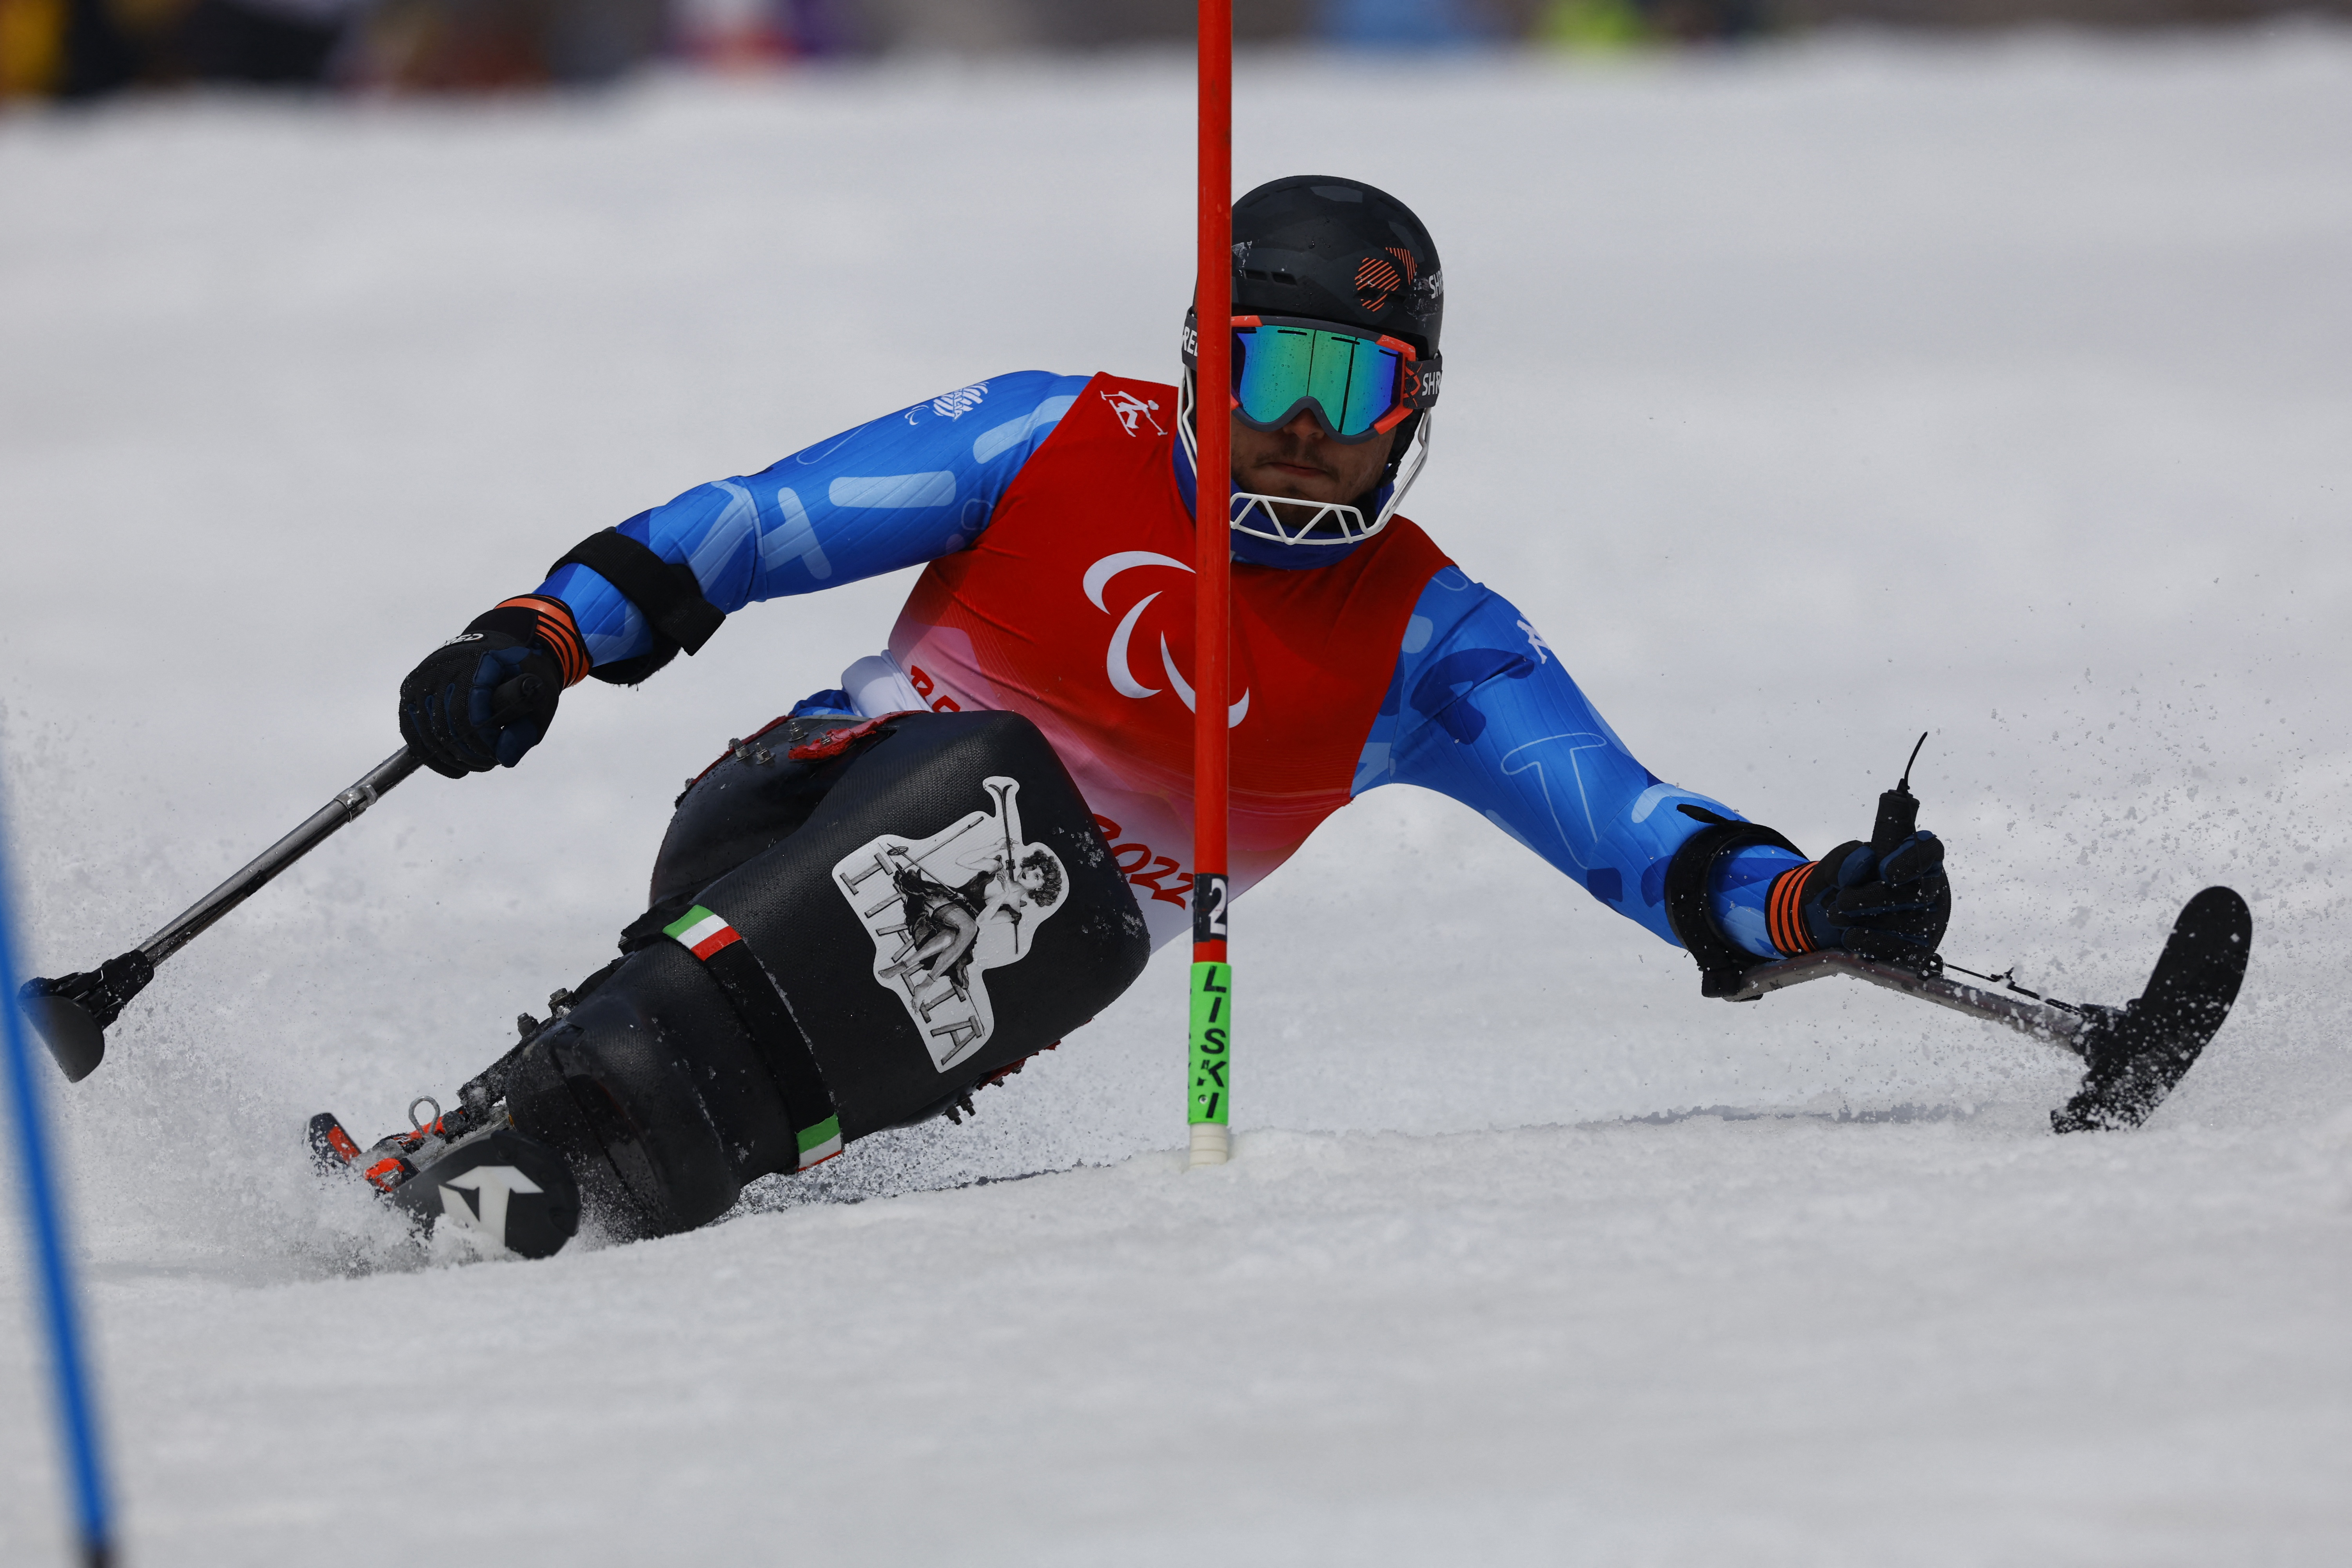 Beijing 2022 Winter Paralympic Games - Para Alpine Skiing - Men's Slalom Sitting - National Alpine Skiing Centre, Yanqing district, Beijing, China - March 13, 2022. Rene de Silvestro of Italy in action during the second run. REUTERS/Gonzalo Fuentes